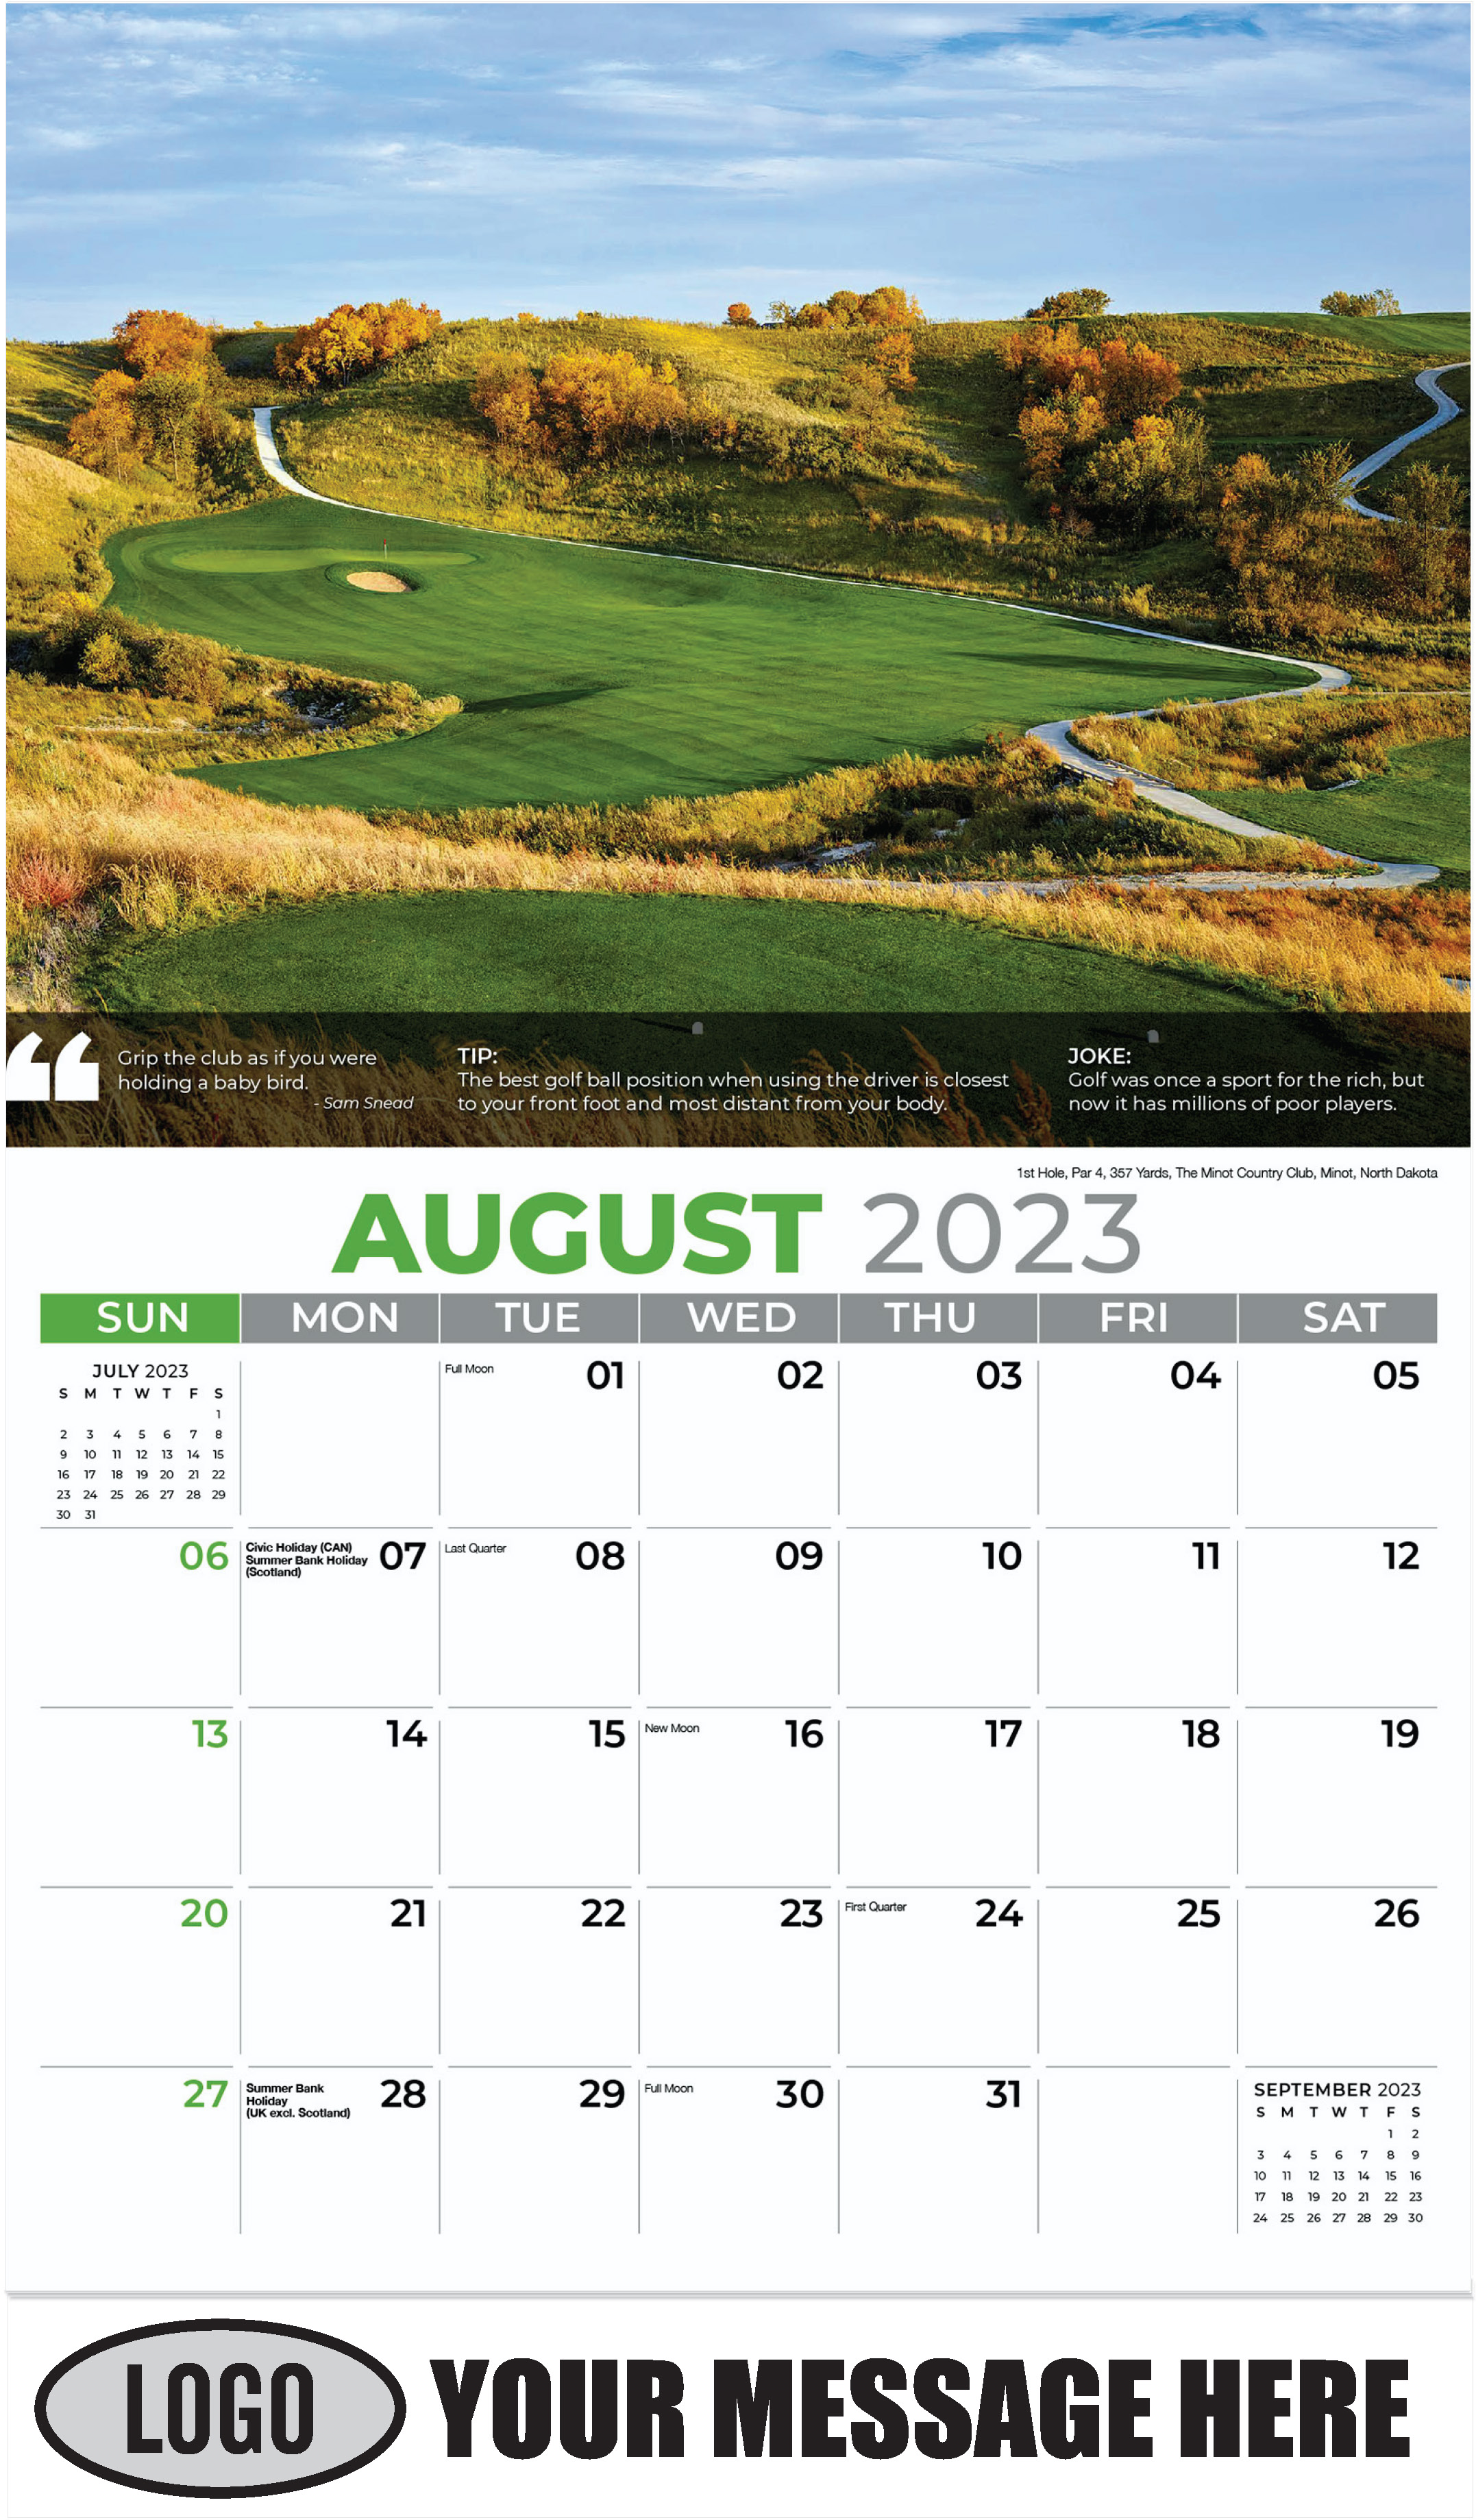 1st Hole, Par 4, 357 Yards, The Minot Country Club, Minot, North Dakota - August - Golf Tips  (Tips, Quips and Holes) 2023 Promotional Calendar